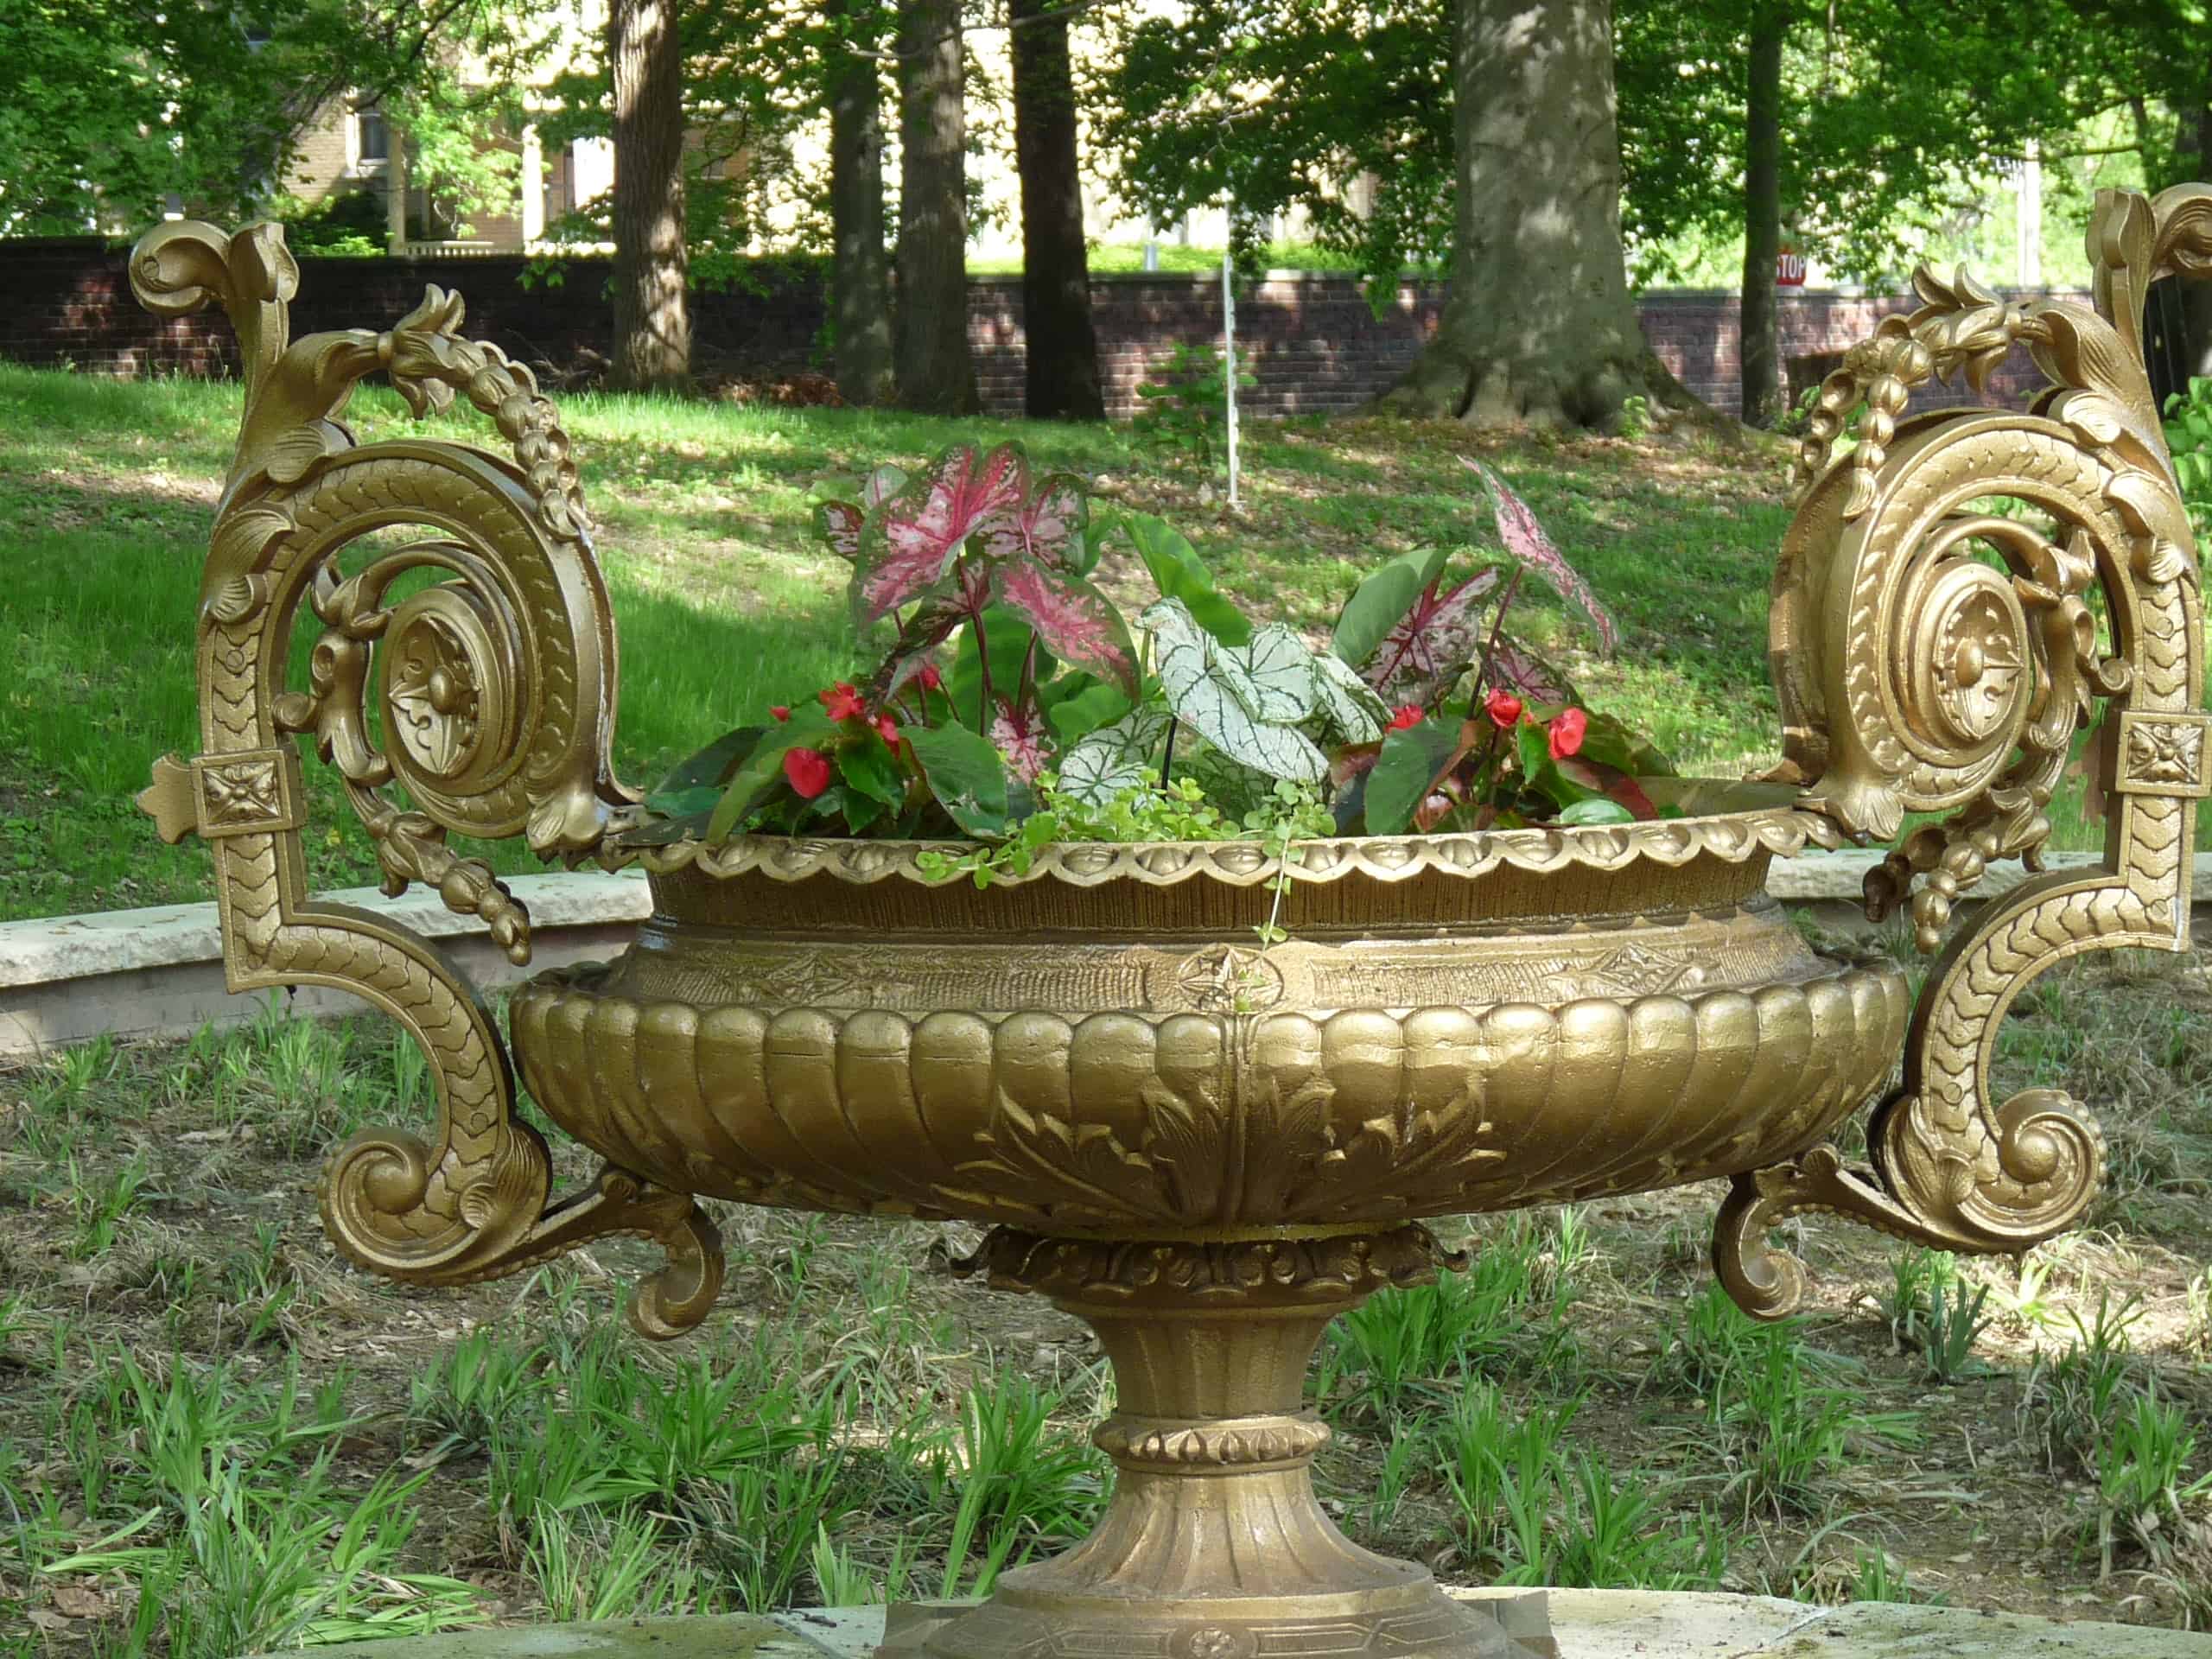 A golden decorative urn planted with flowers